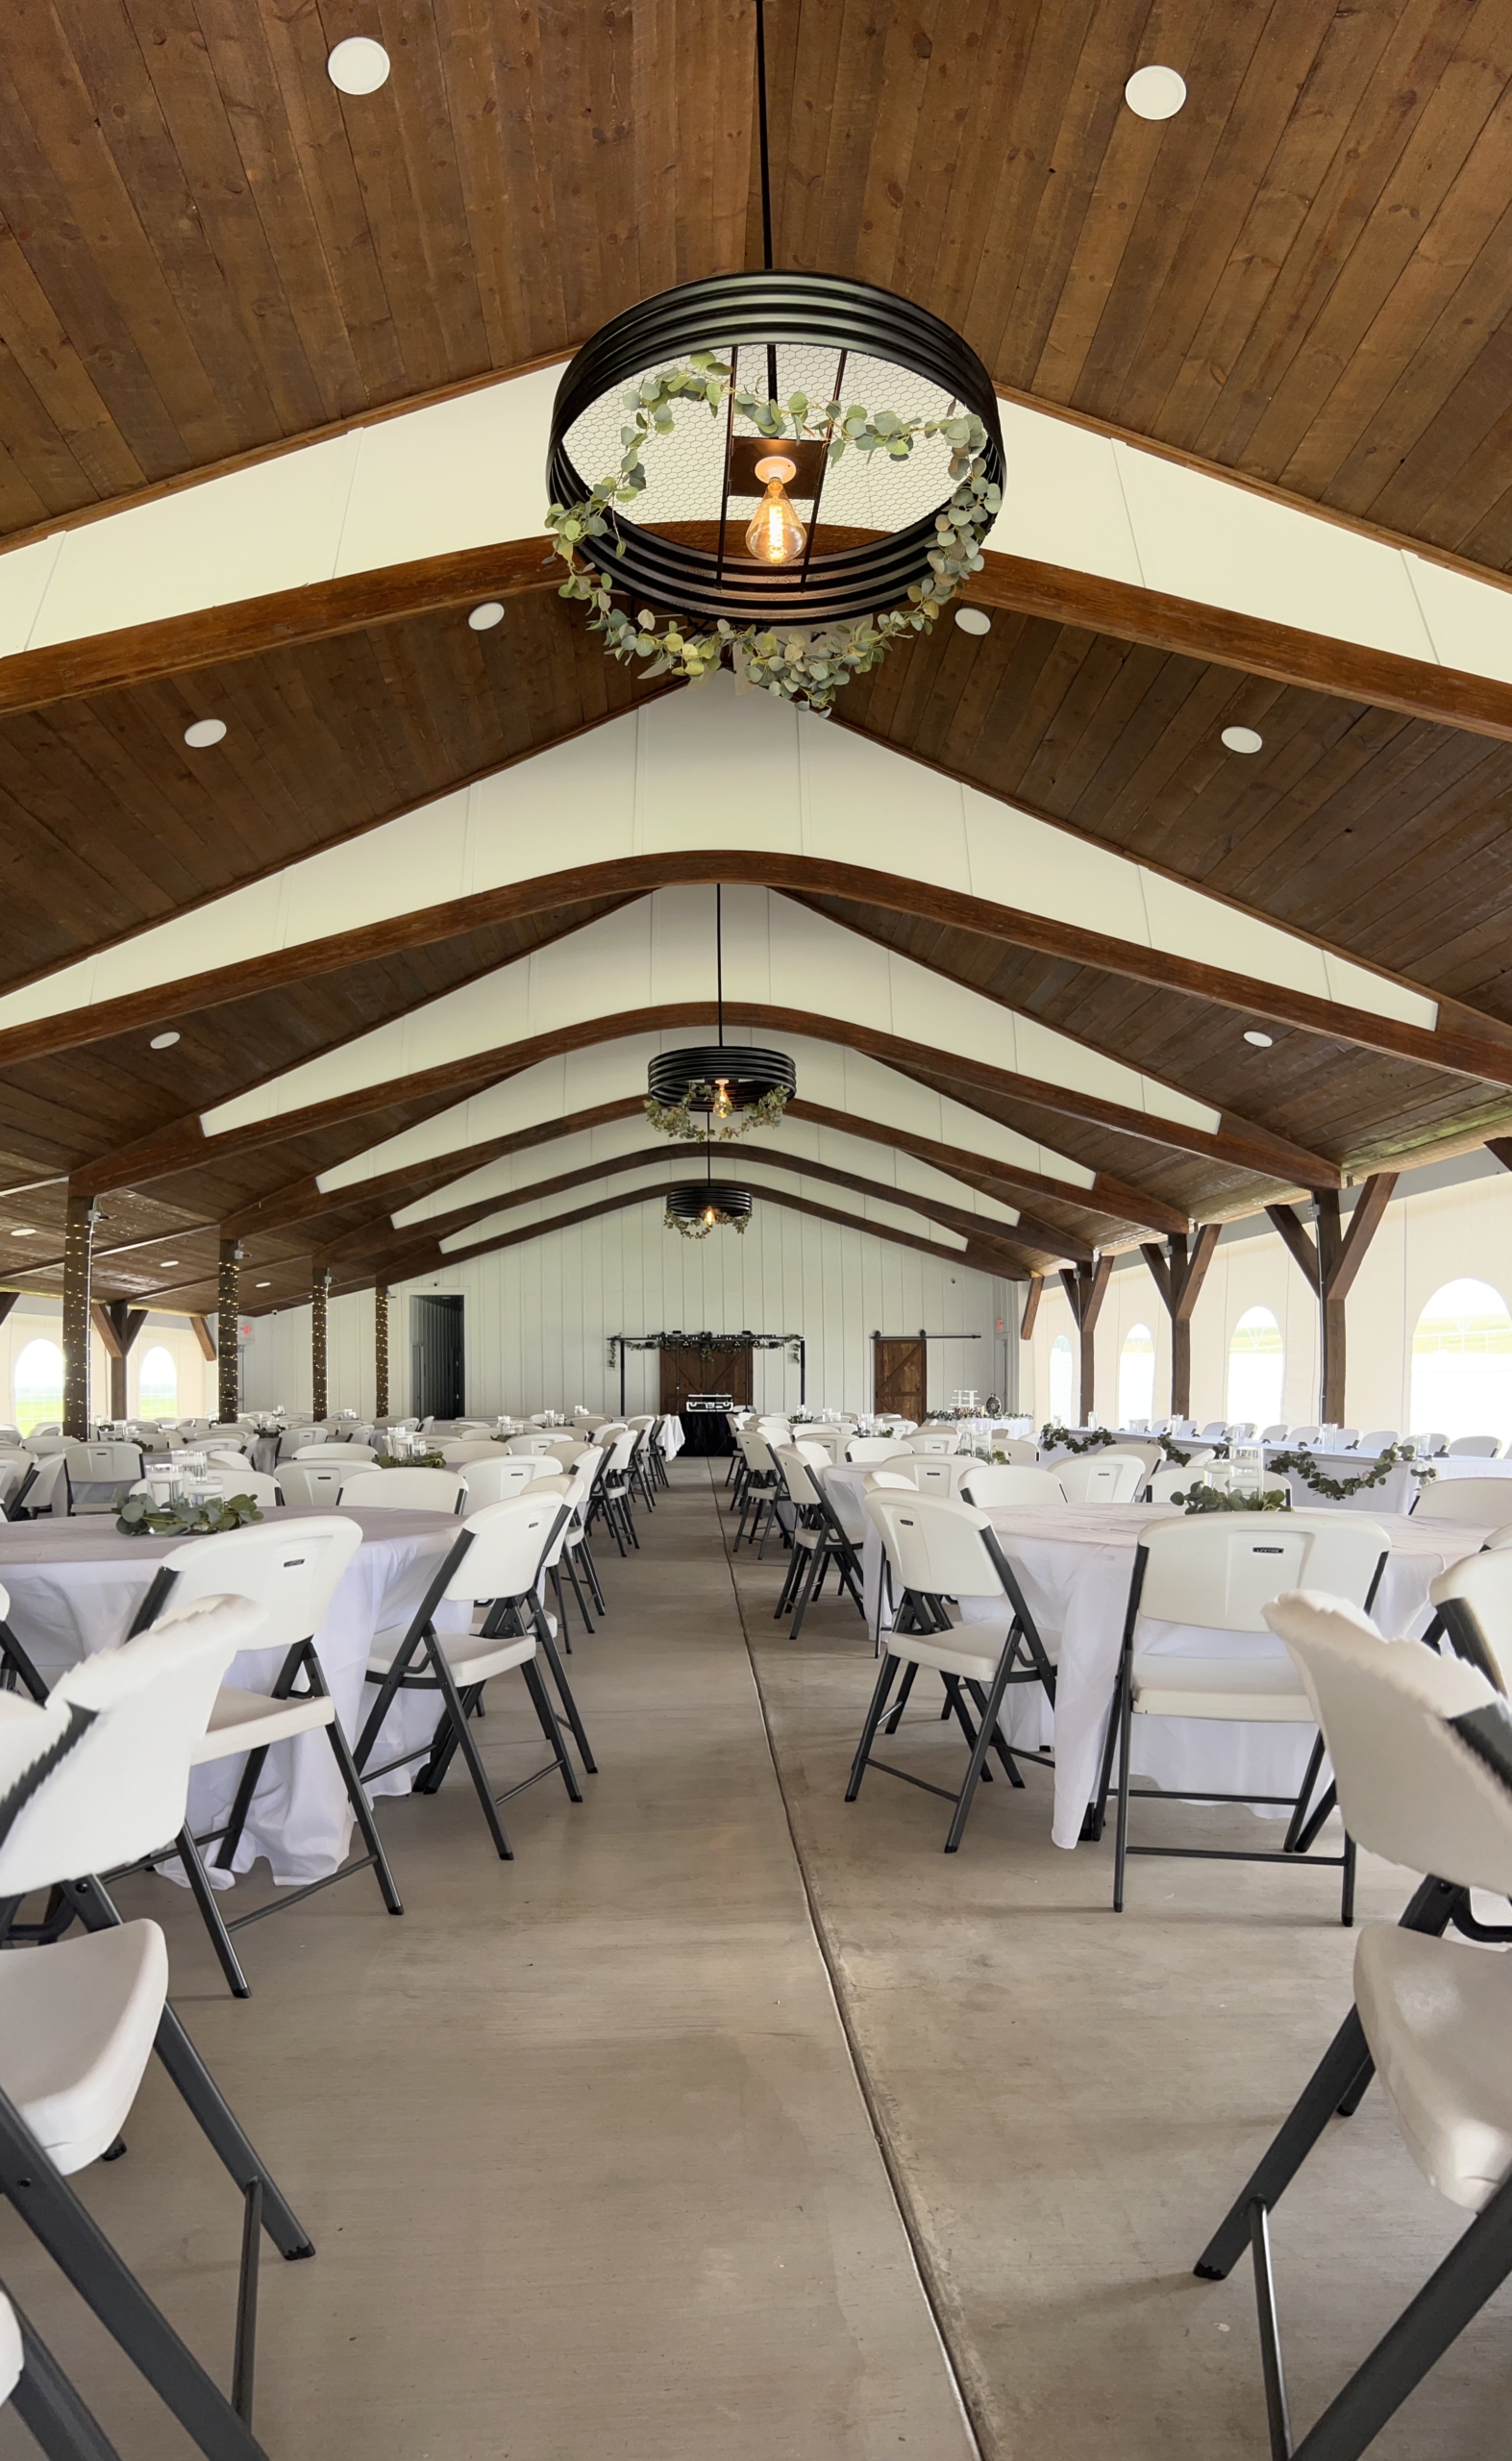 Interior view of Twisted Oaks pavilion